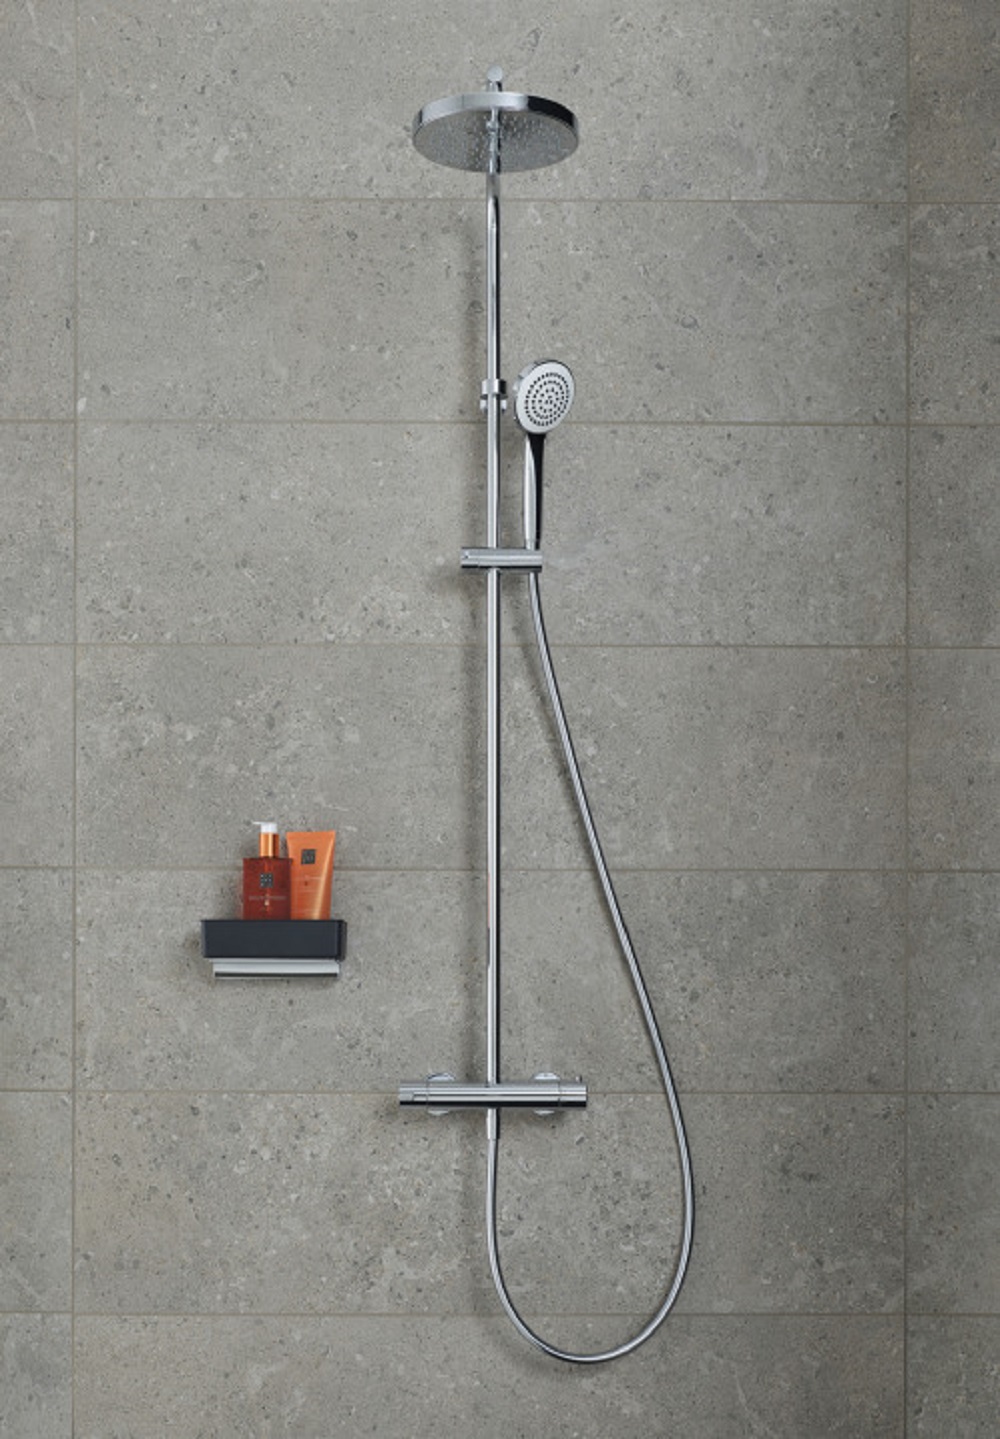 thermostatic heat controls in the shower as a safety feature by Duravit